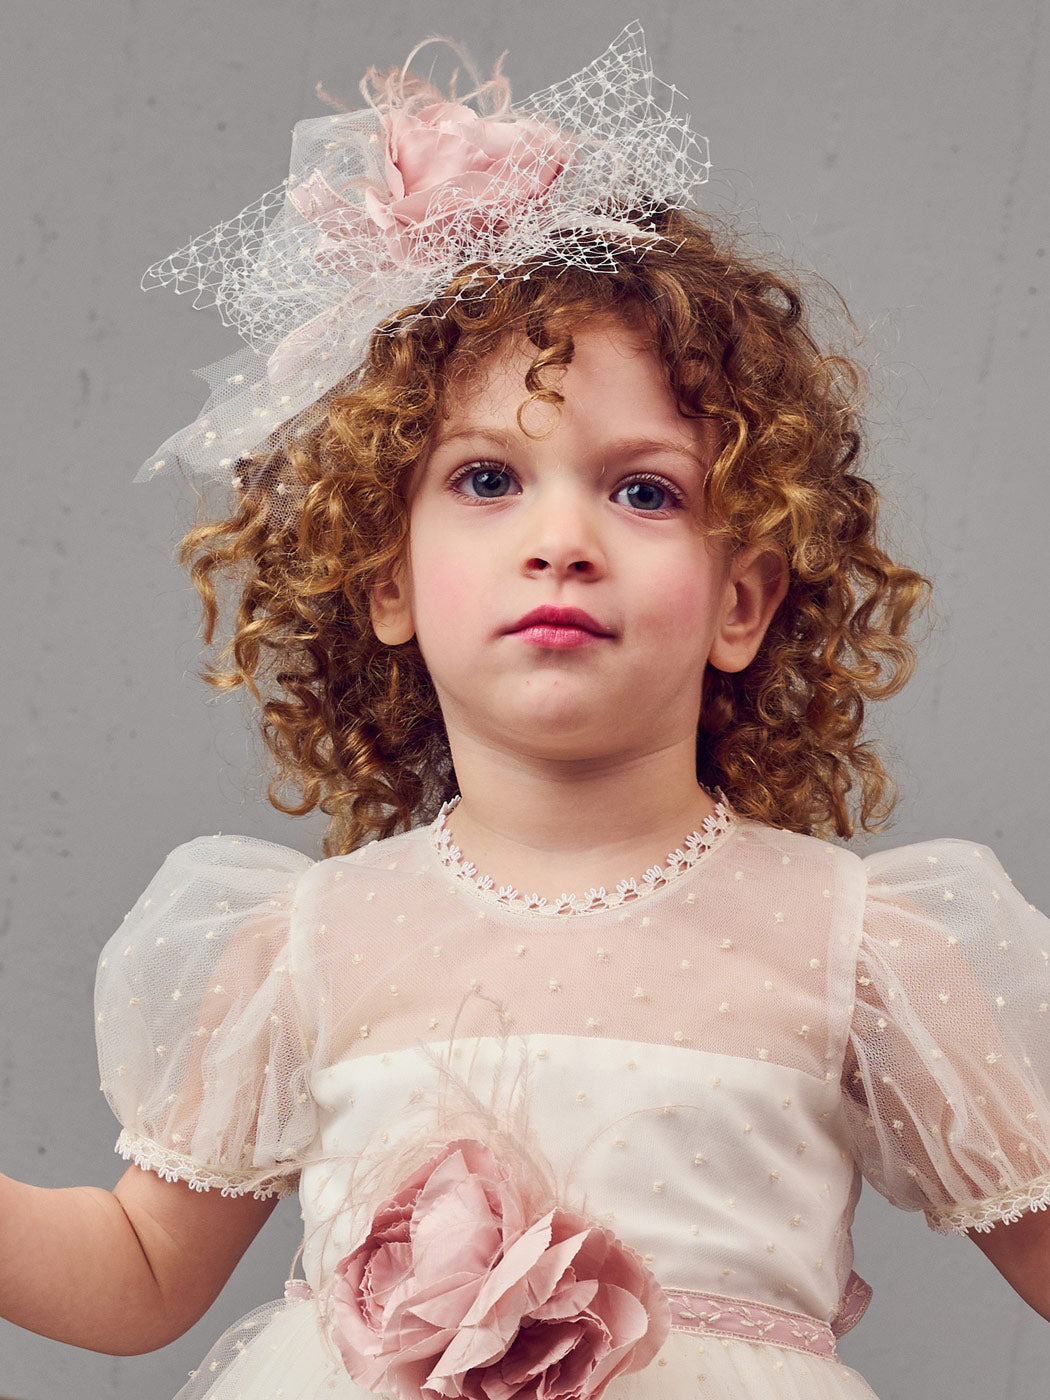 Baptism Tulle dress with inflatable sleeves - KATIE